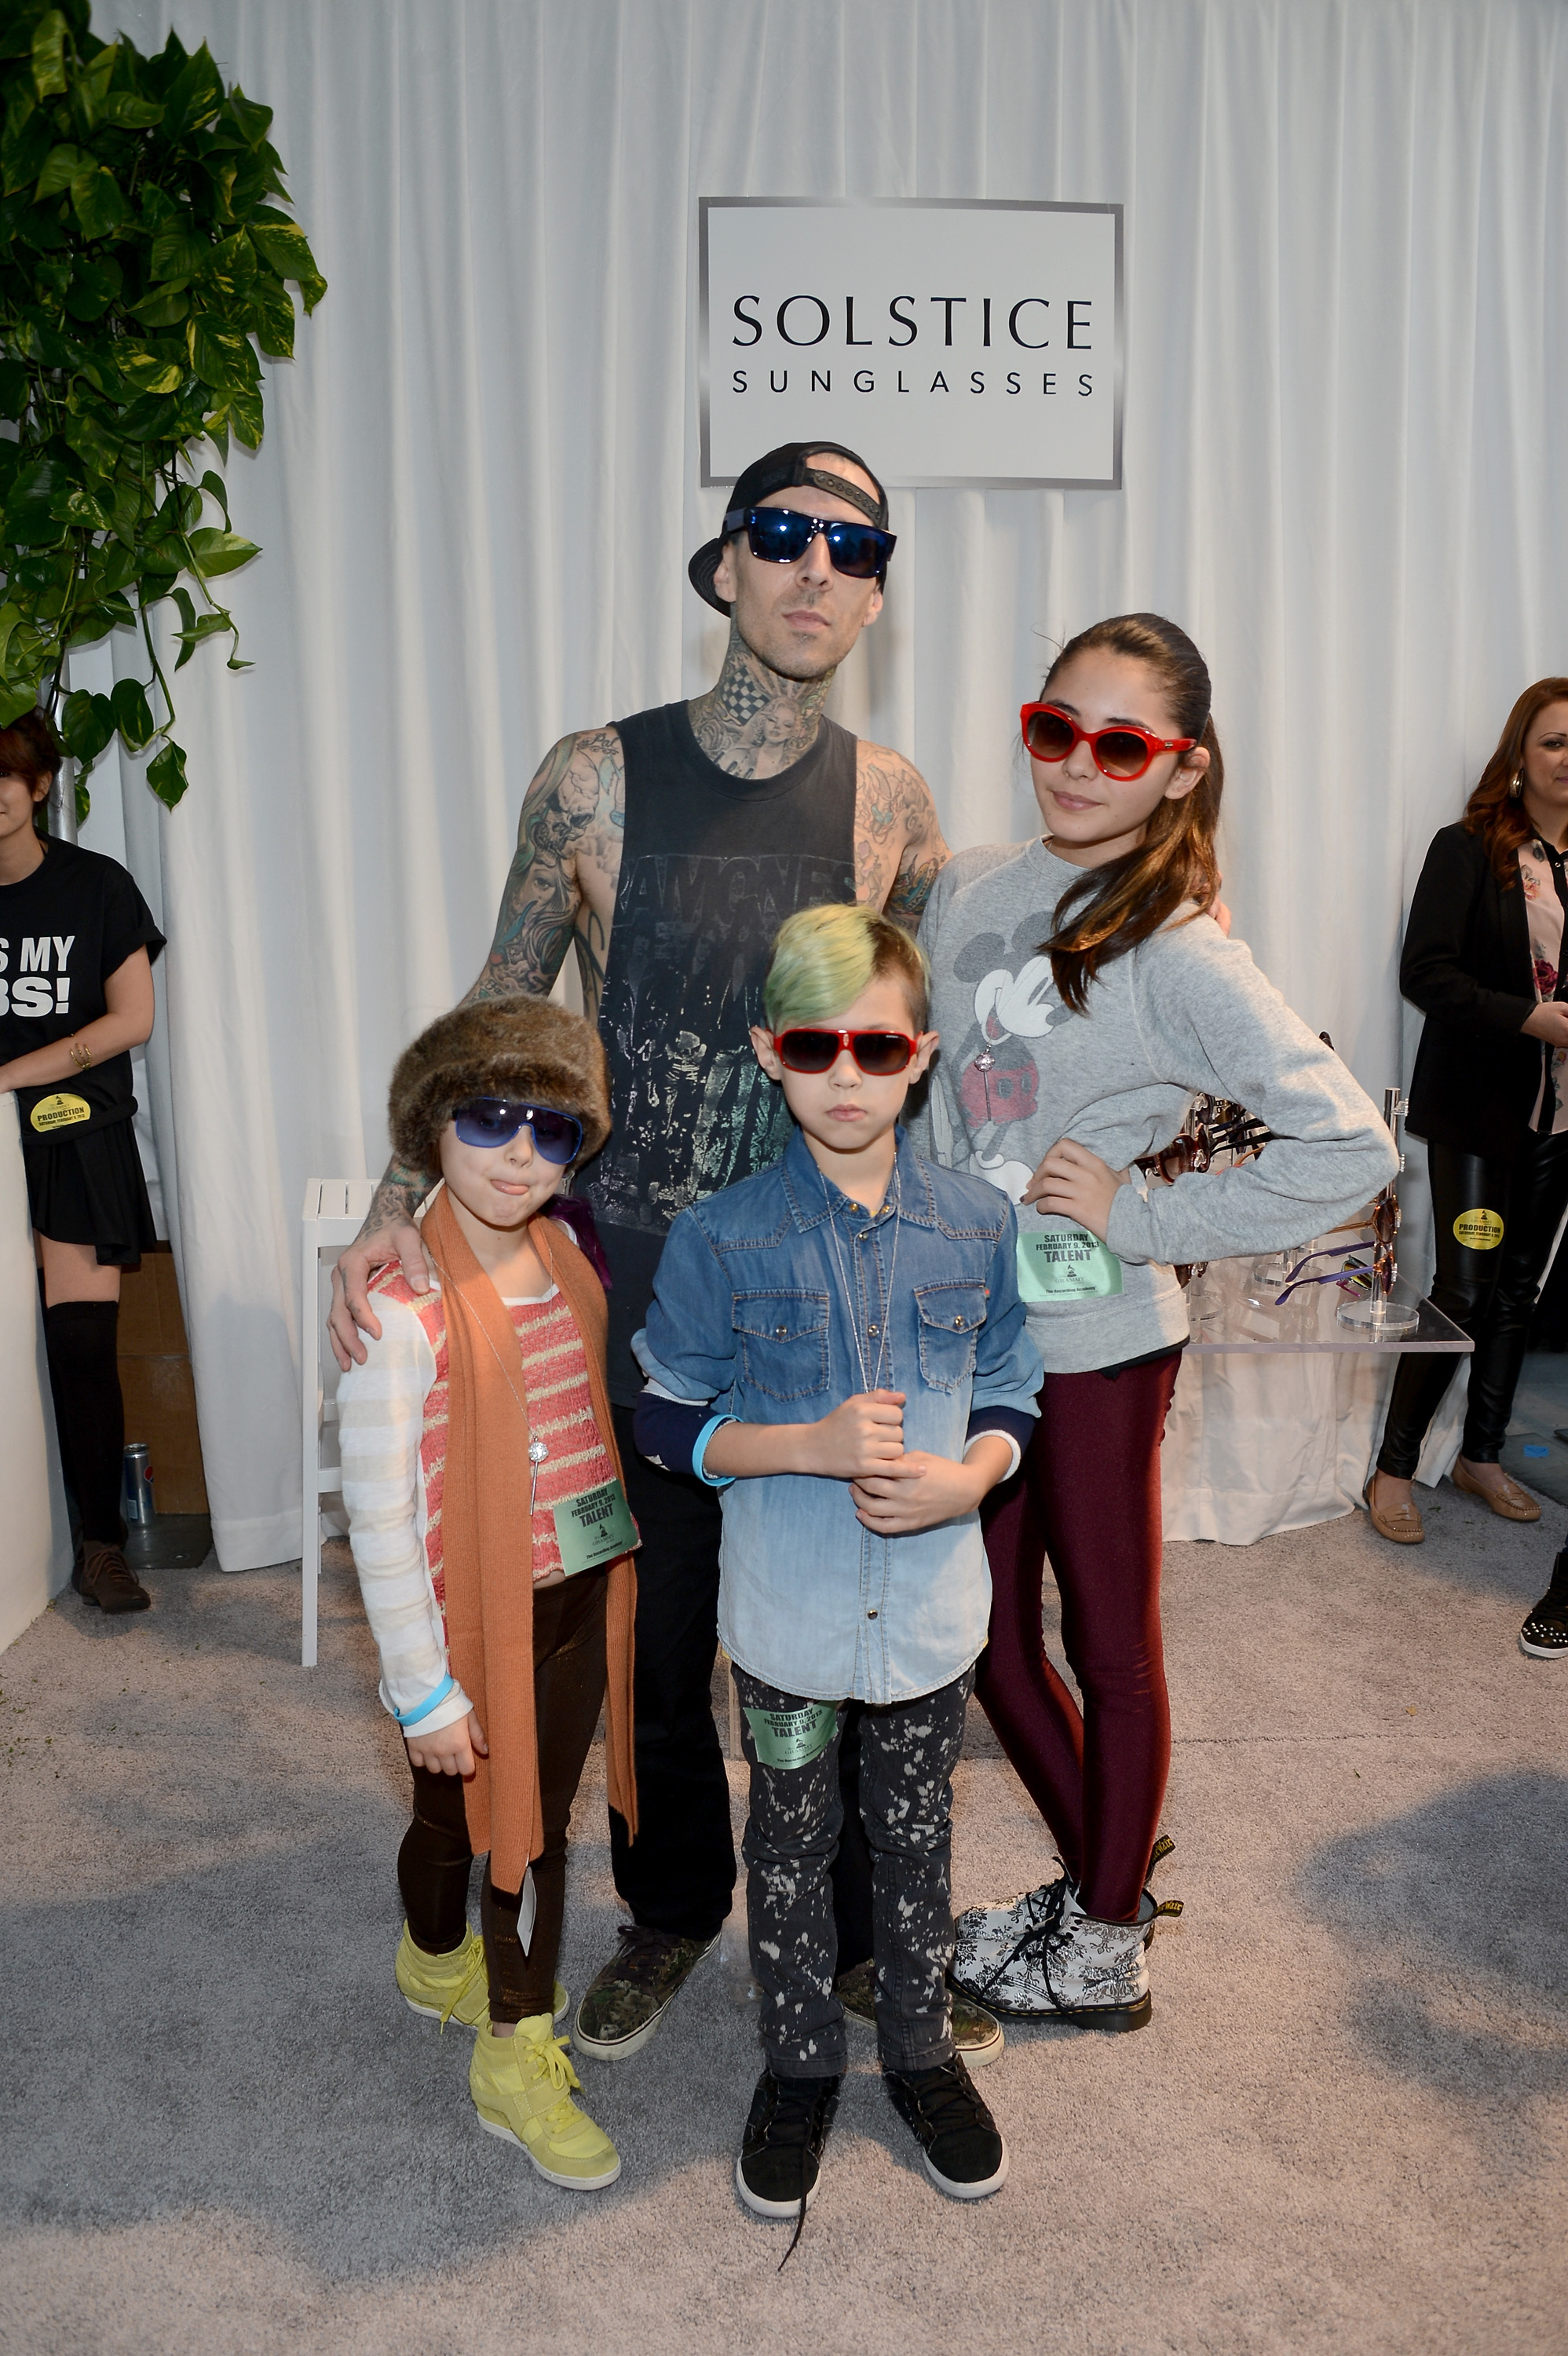 LOS ANGELES, CA - FEBRUARY 09:  Musician Travis Barker in Carrera CA5002S and family pose with SOLSTICE Sunglasses and Safilo USA during the 55th Annual GRAMMY Awards at the STAPLES Center on February 9, 2013 in Los Angeles, California.  (Photo by Amanda Edwards/WireImage)